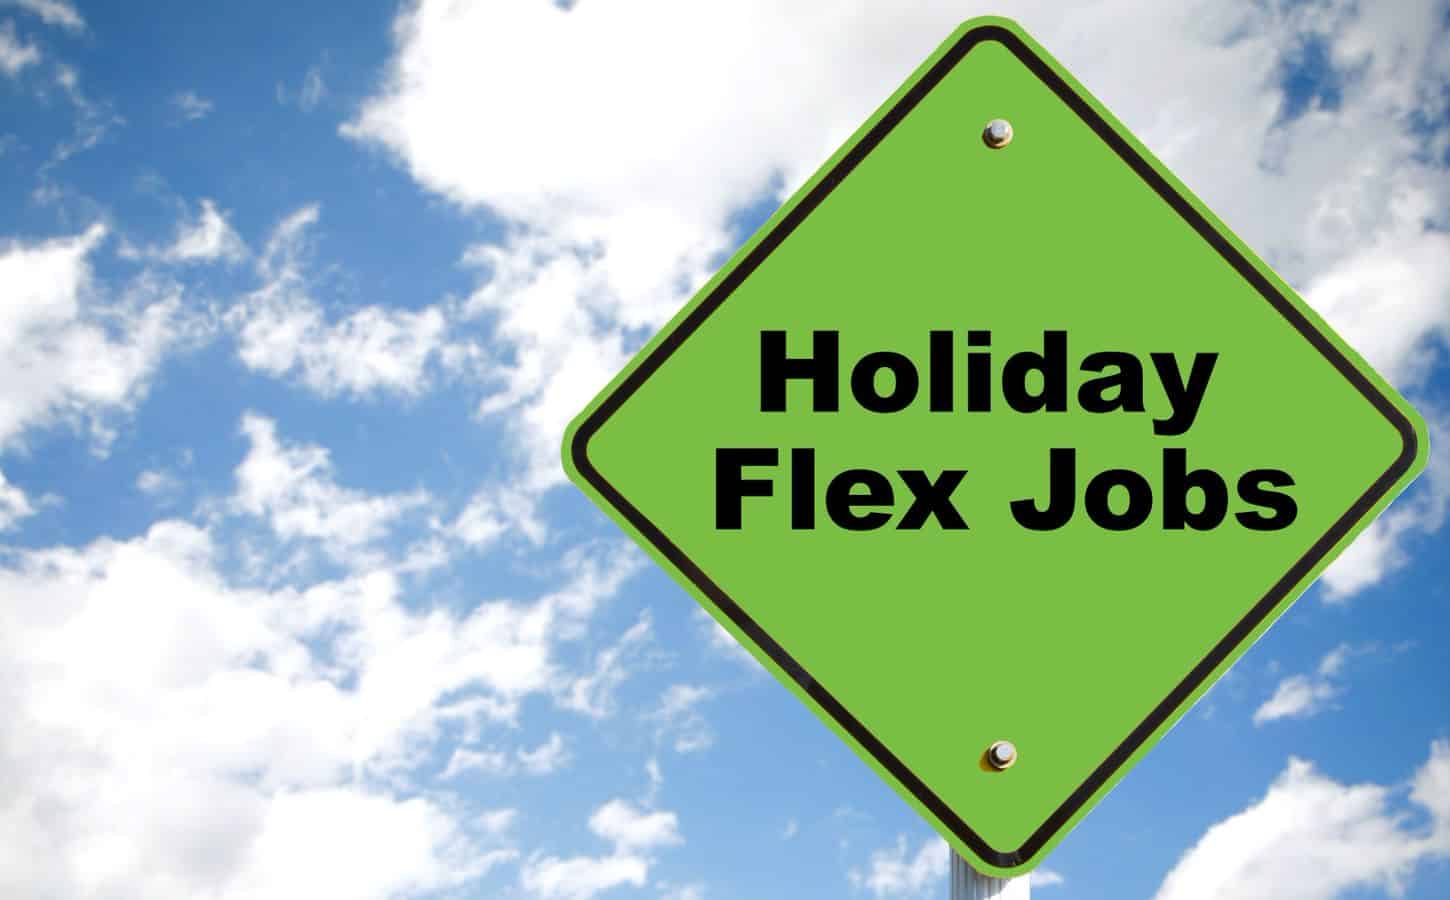 road sign with holiday flex job text